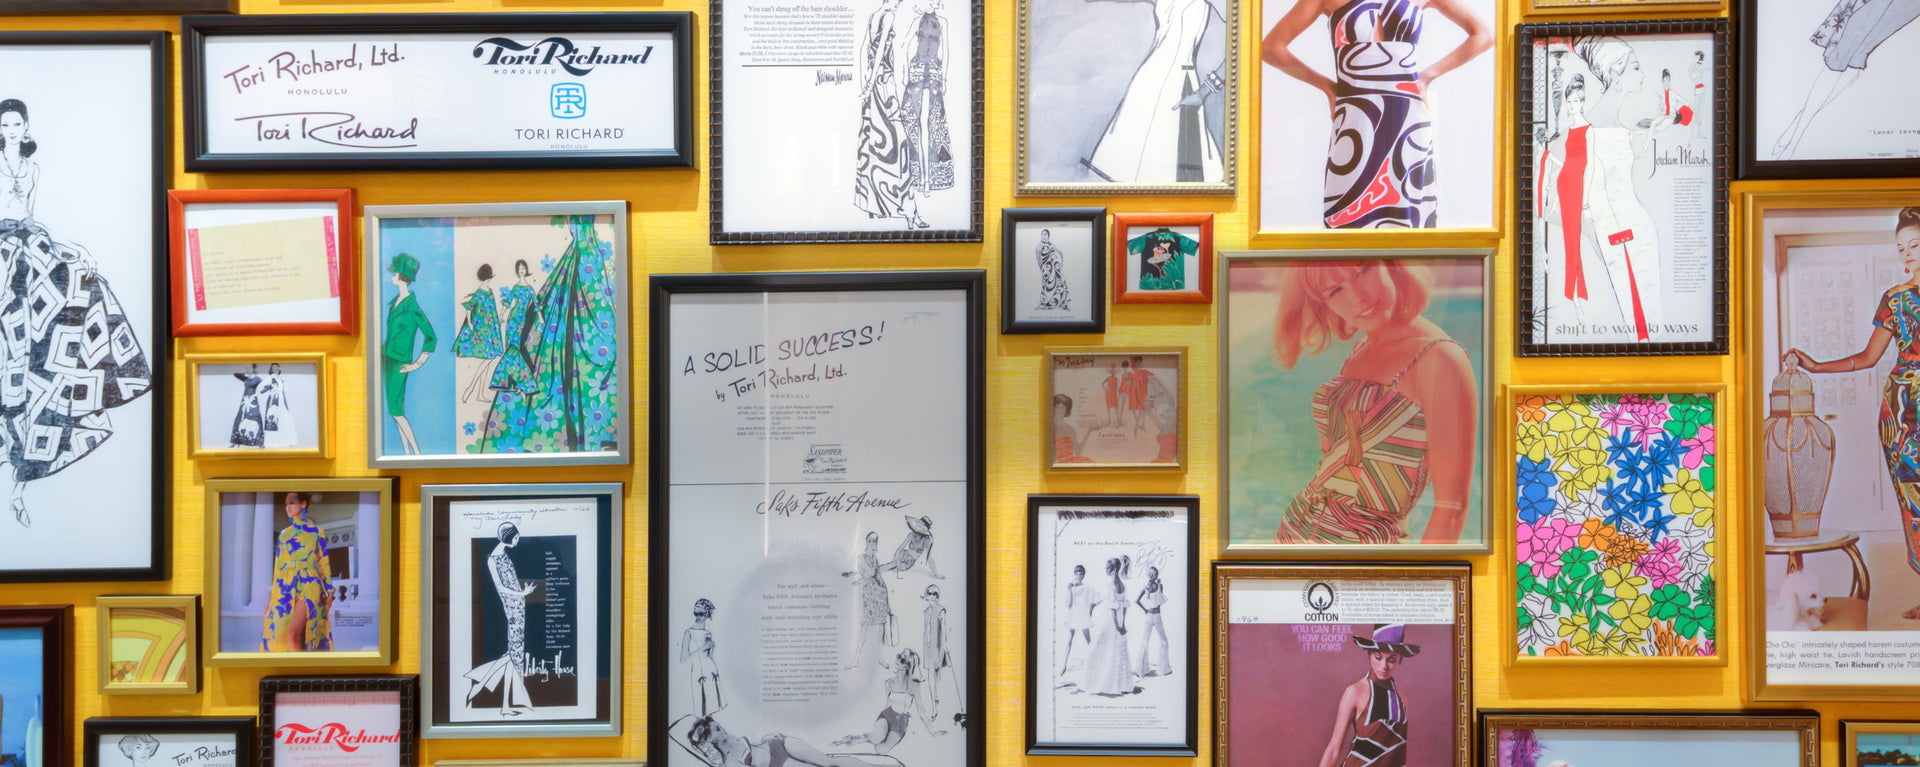 image of collages frames on the wall with various fashions from 1970s Tori Richard